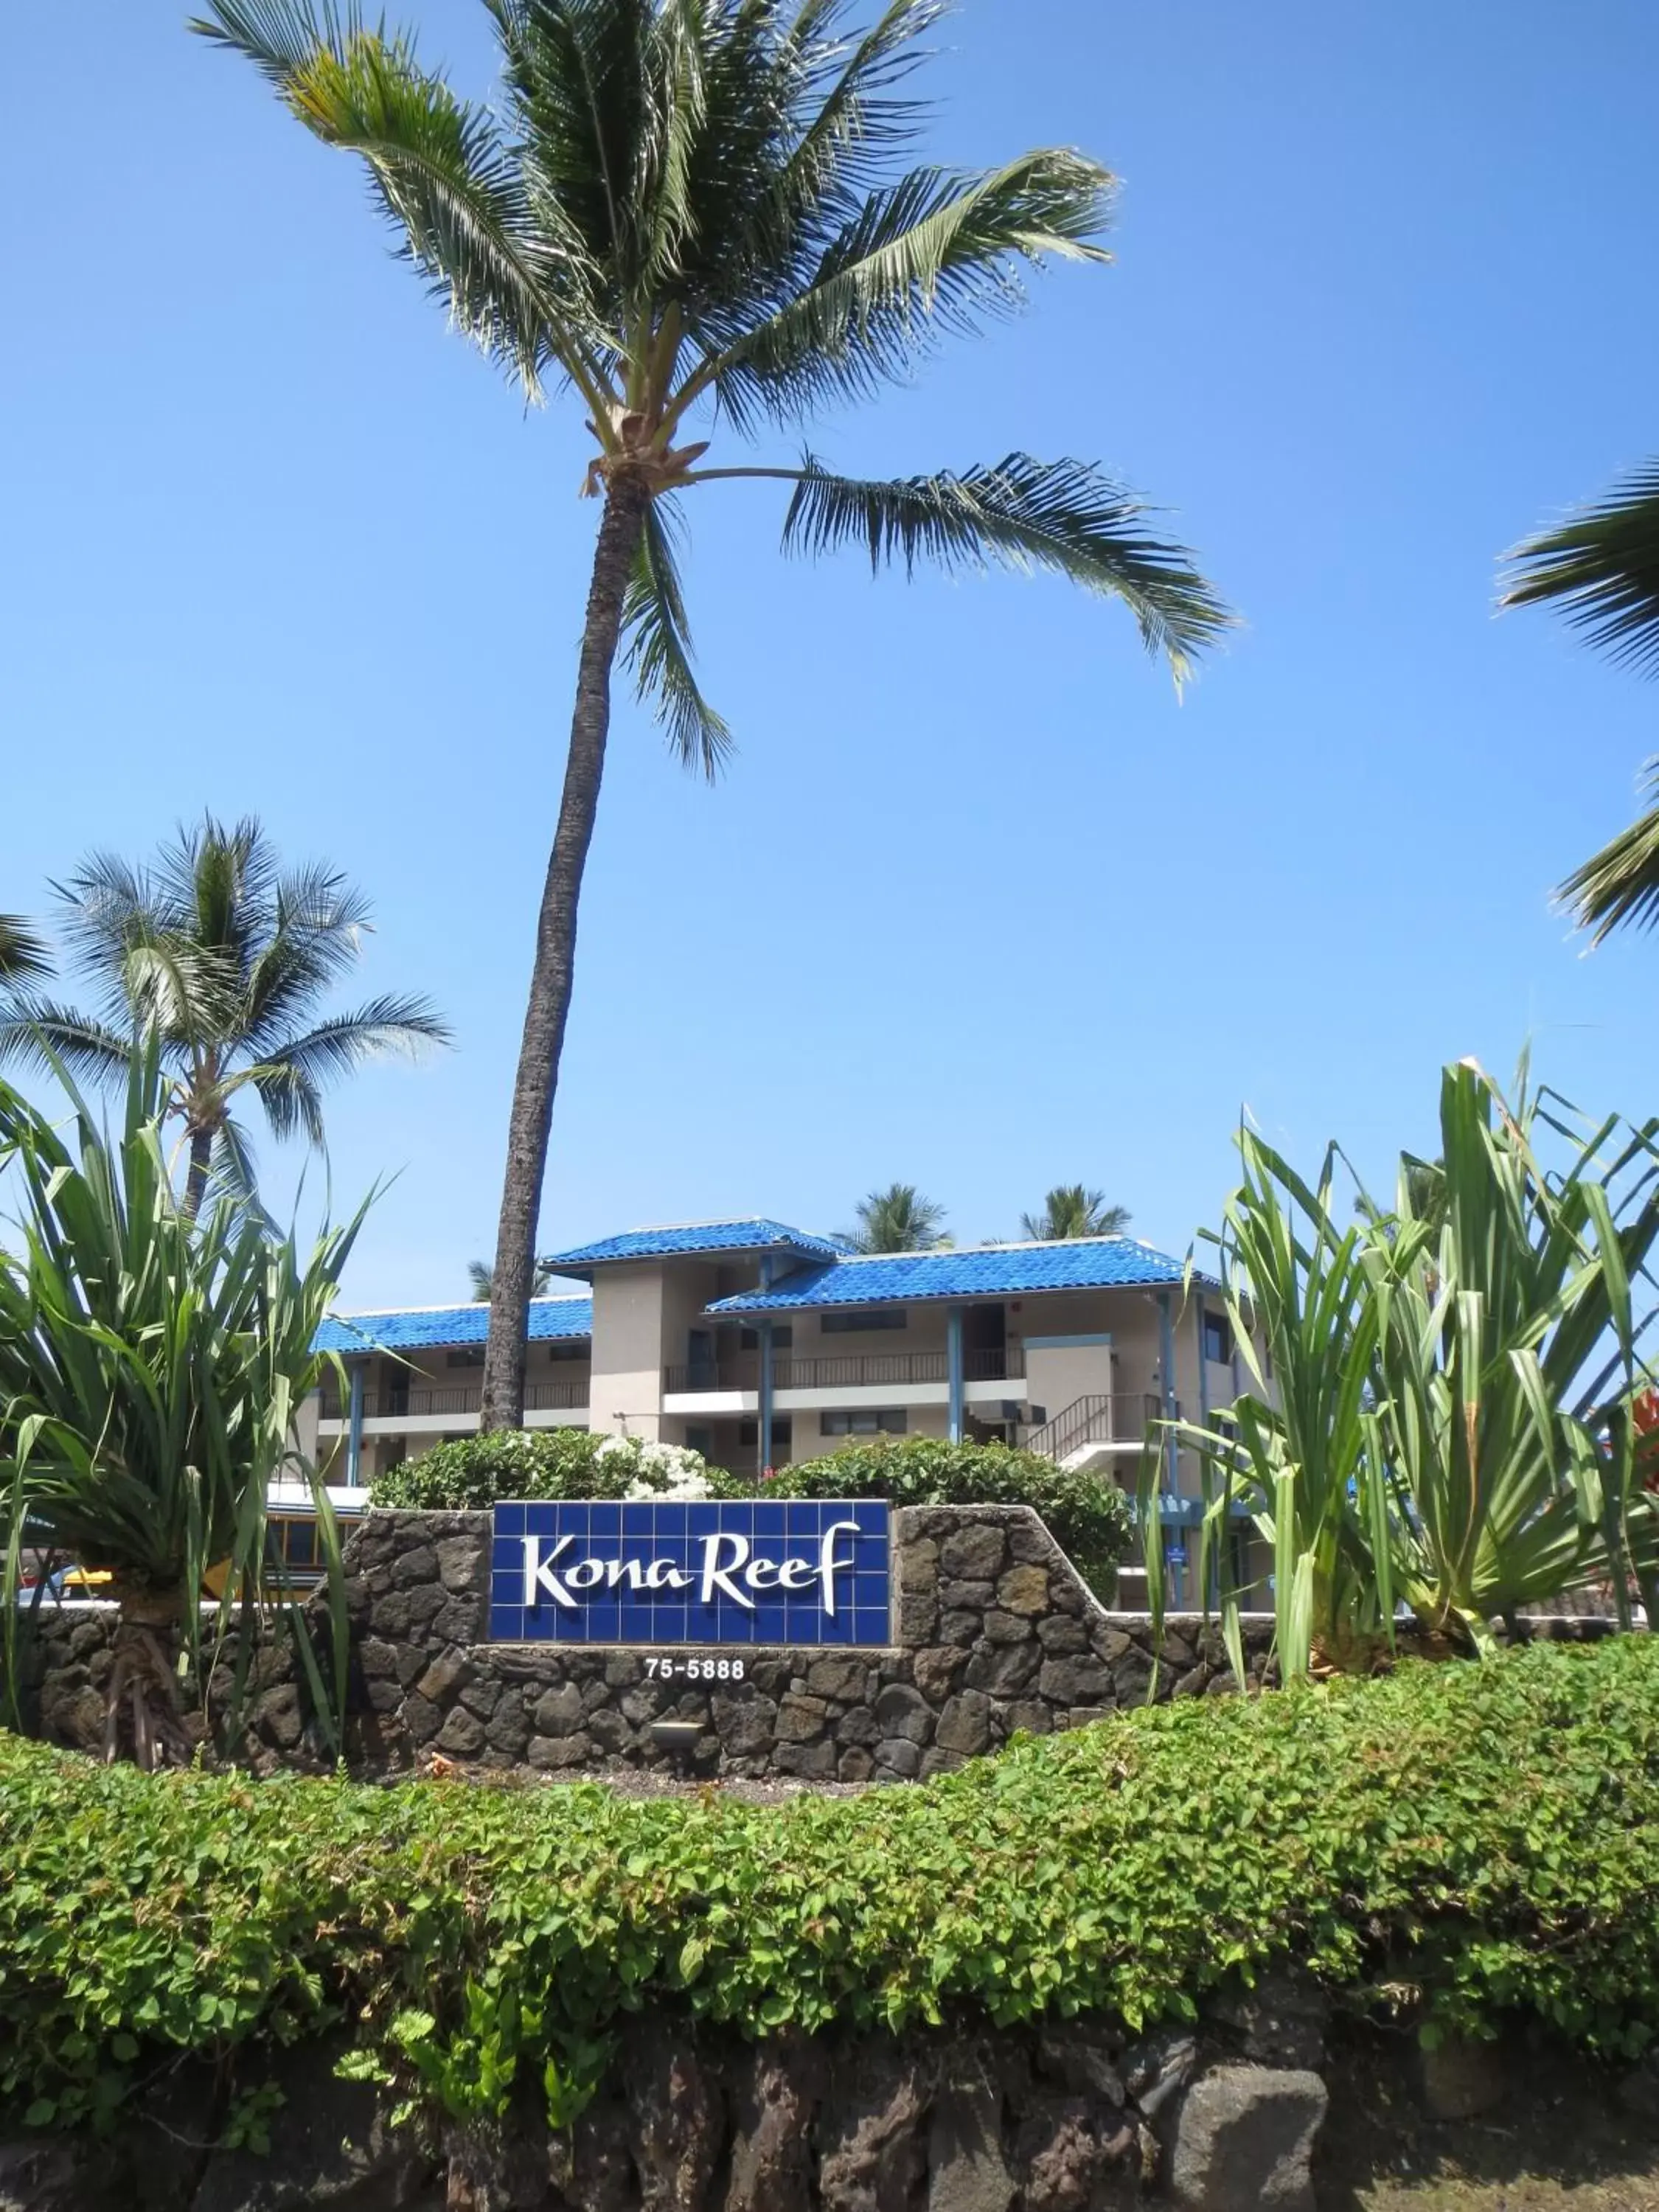 Property Building in Kona Reef Resort by Latour Group